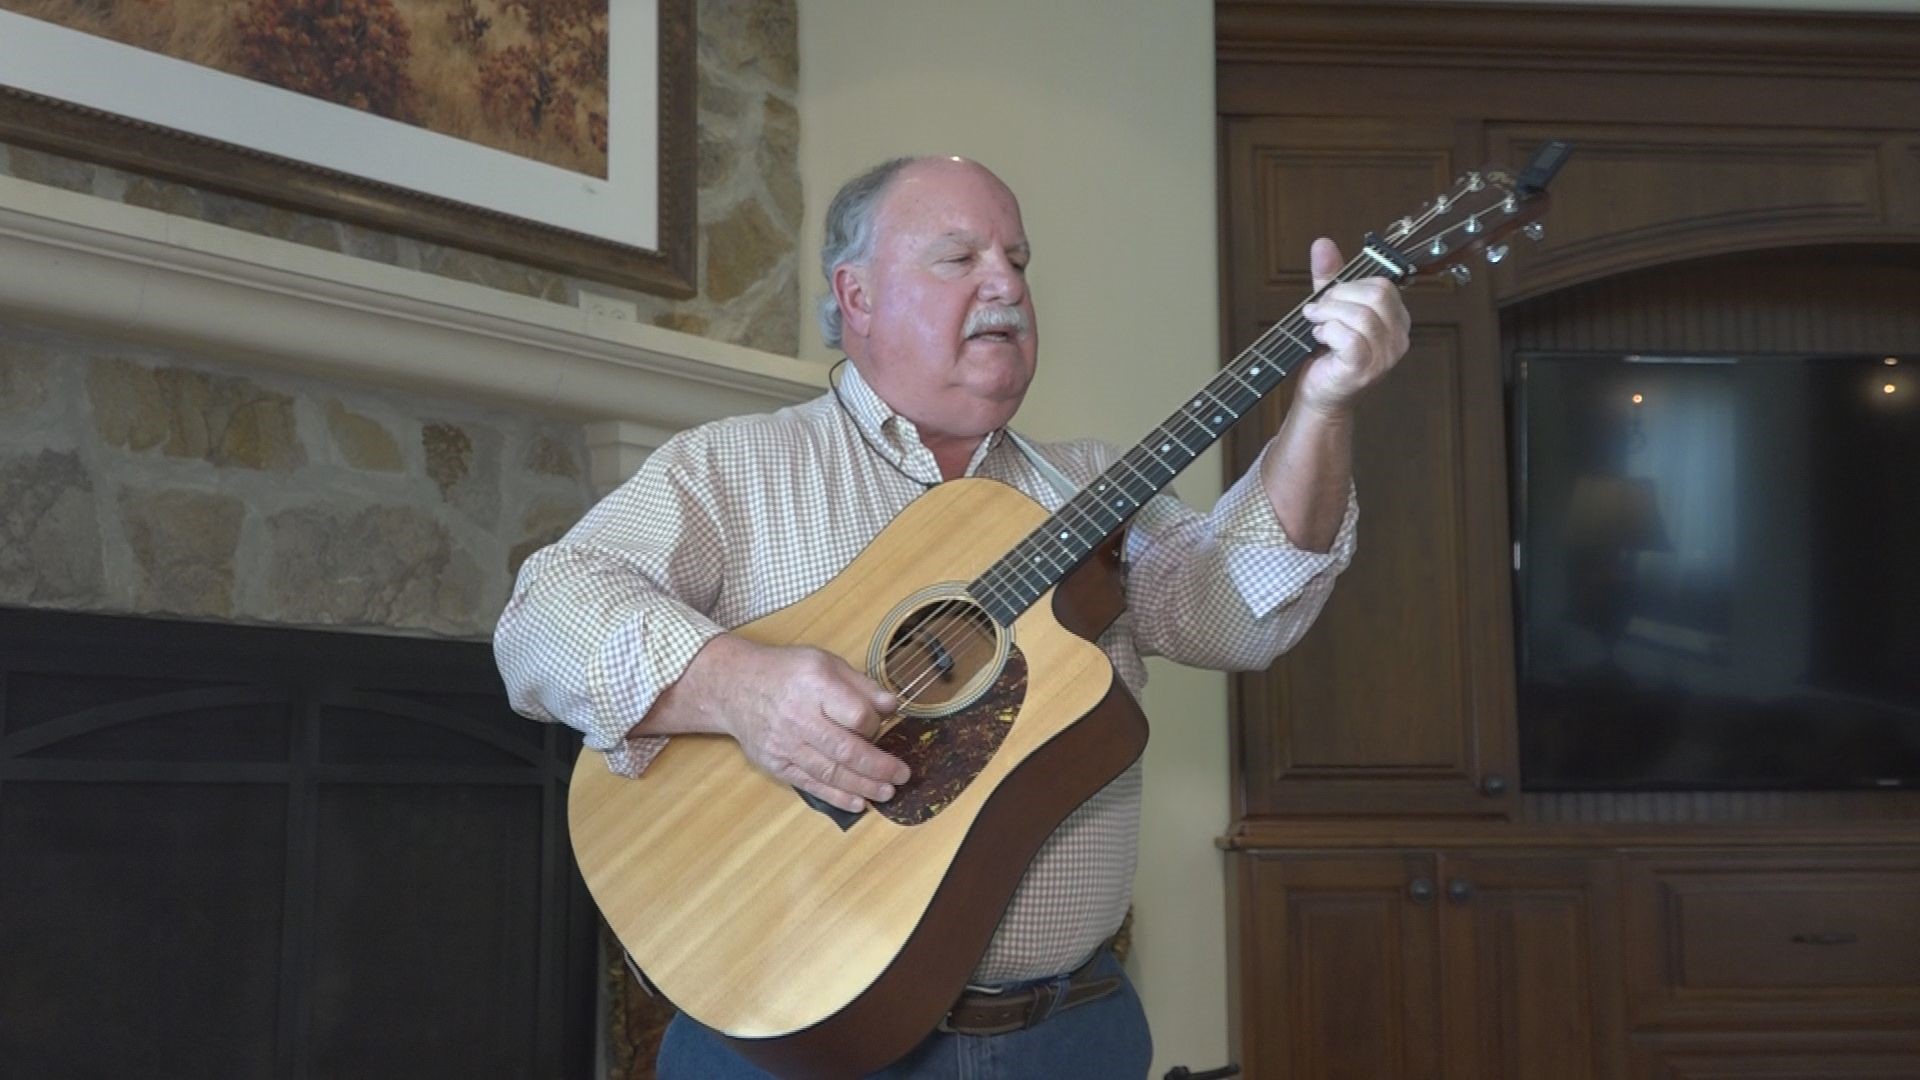 With a high draft lottery number, 67-year-old George Gibson missed having to serve in the Vietnam War. But it hasn't stopped the Lodi home builder from writing an inspirational song about veterans living with Post Traumatic Stress Disorder (PTSD).